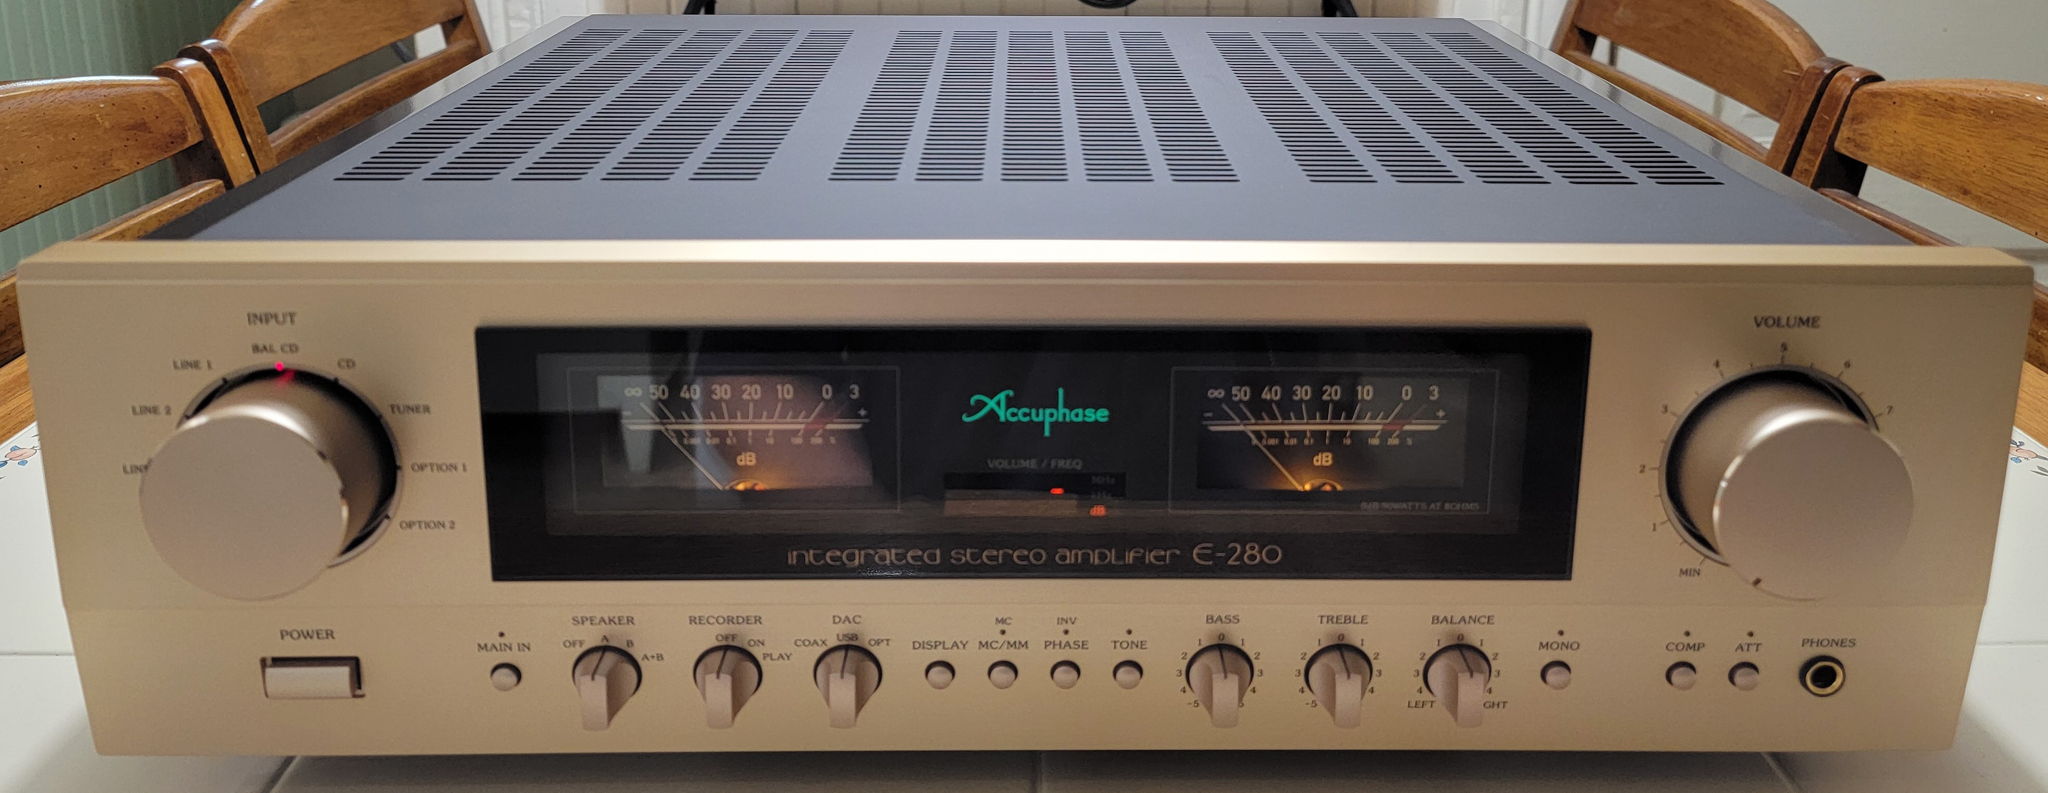 Accuphase E-280 with DAC-60 card